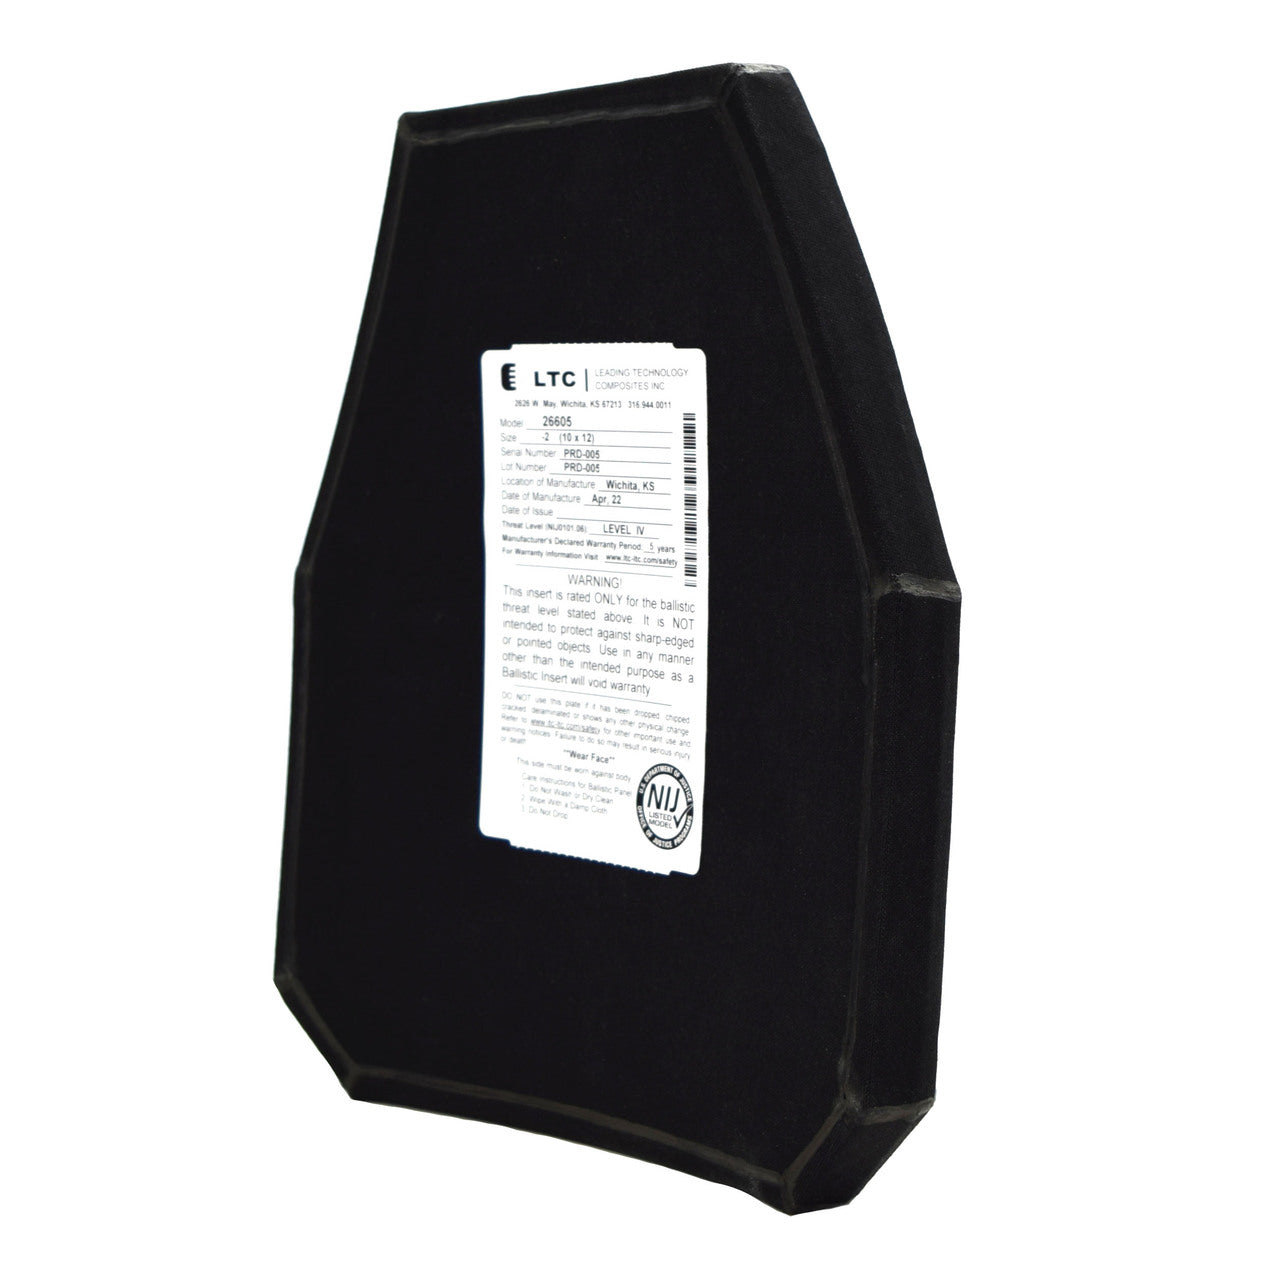 Black coffin-shaped box with a label on it displaying Shellback Tactical 10 x 12 Triple-Curve Swimmer Cut Level IV Hard Armor Plate Model 26605-2 product information, isolated on a white background.